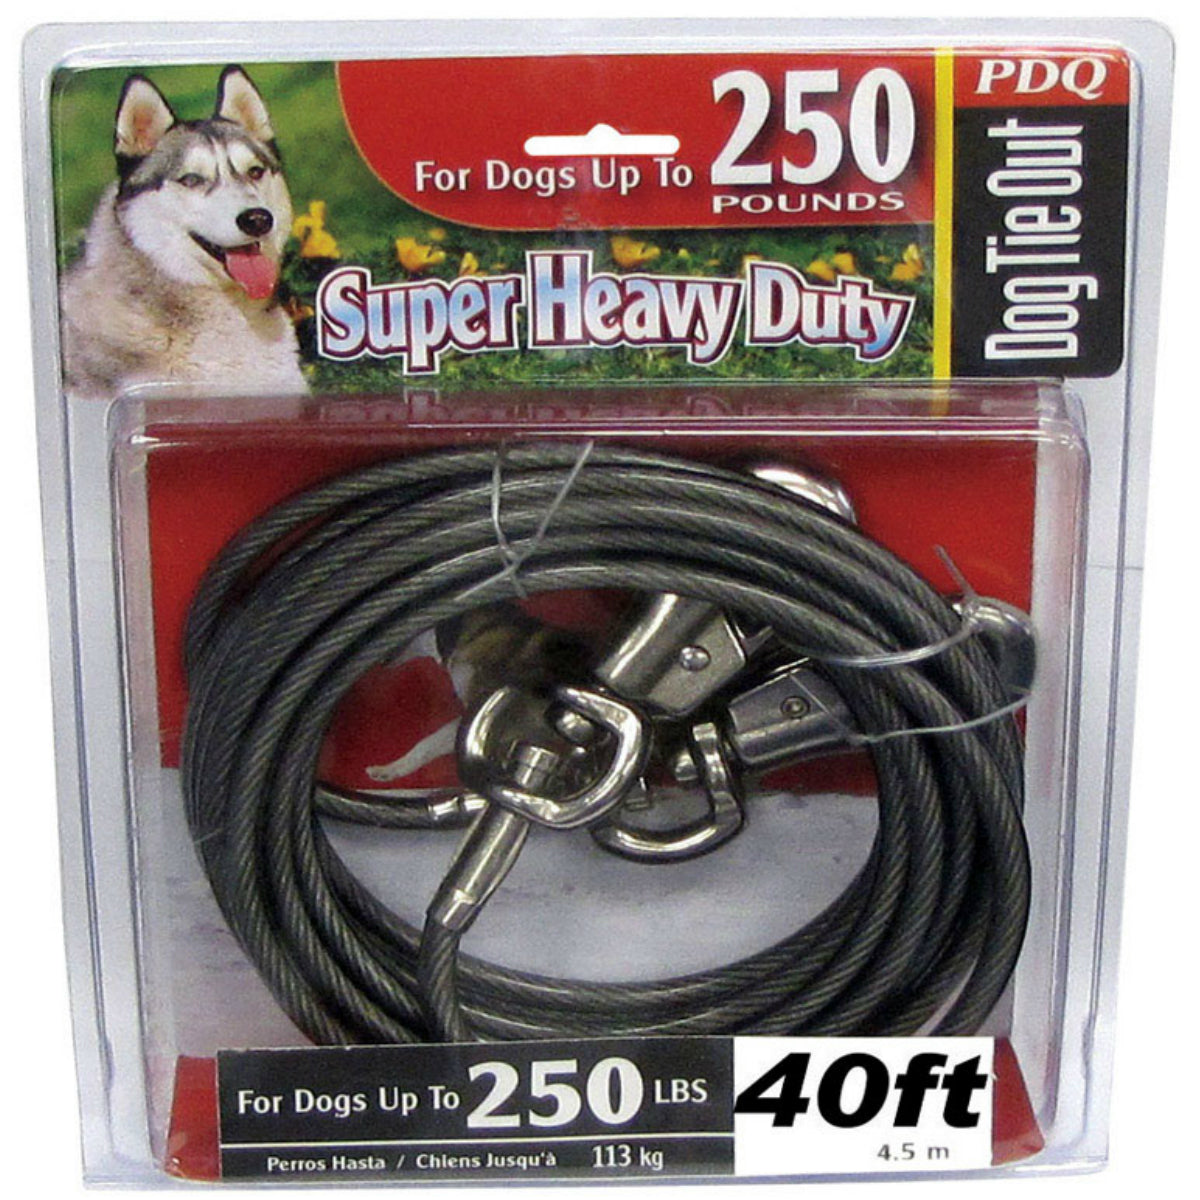 PDQ Q6840-000-99 Super Beast Tie Out Cable, 40', XX Large